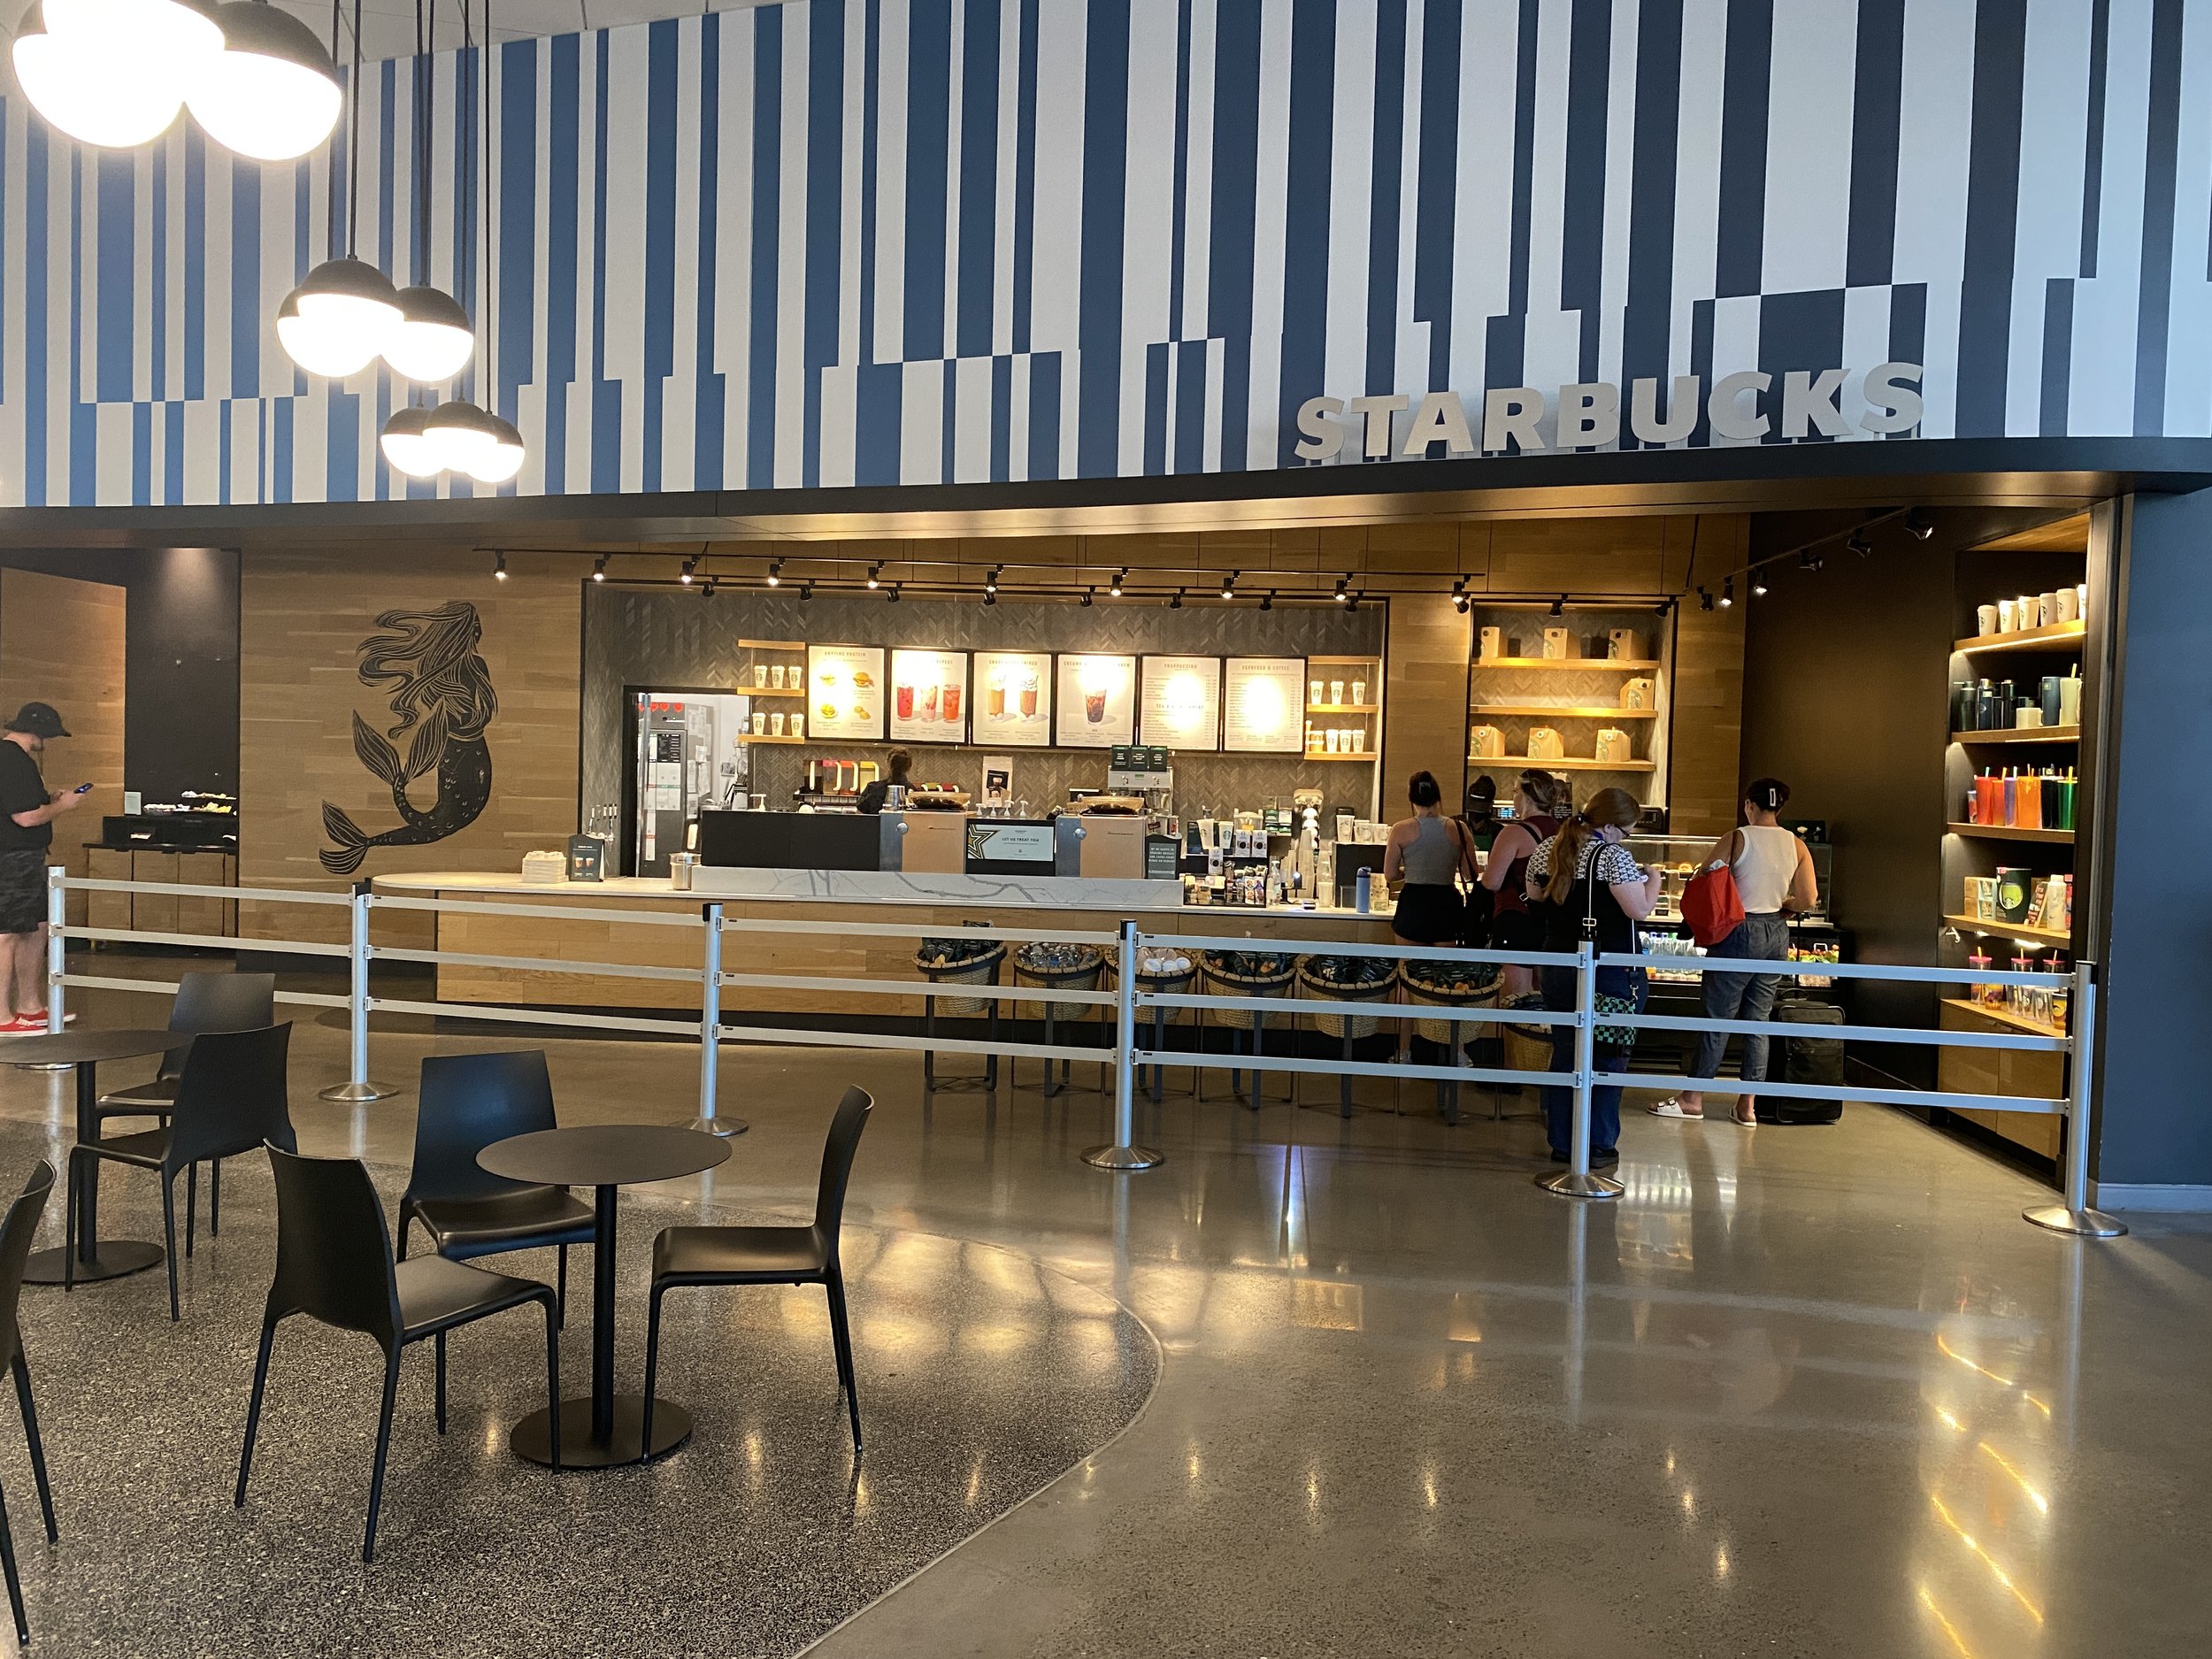  Starbucks in the main lobby opens early in the morning. This is a full service Starbucks serving specialty coffee, baked goods, and snacks. 